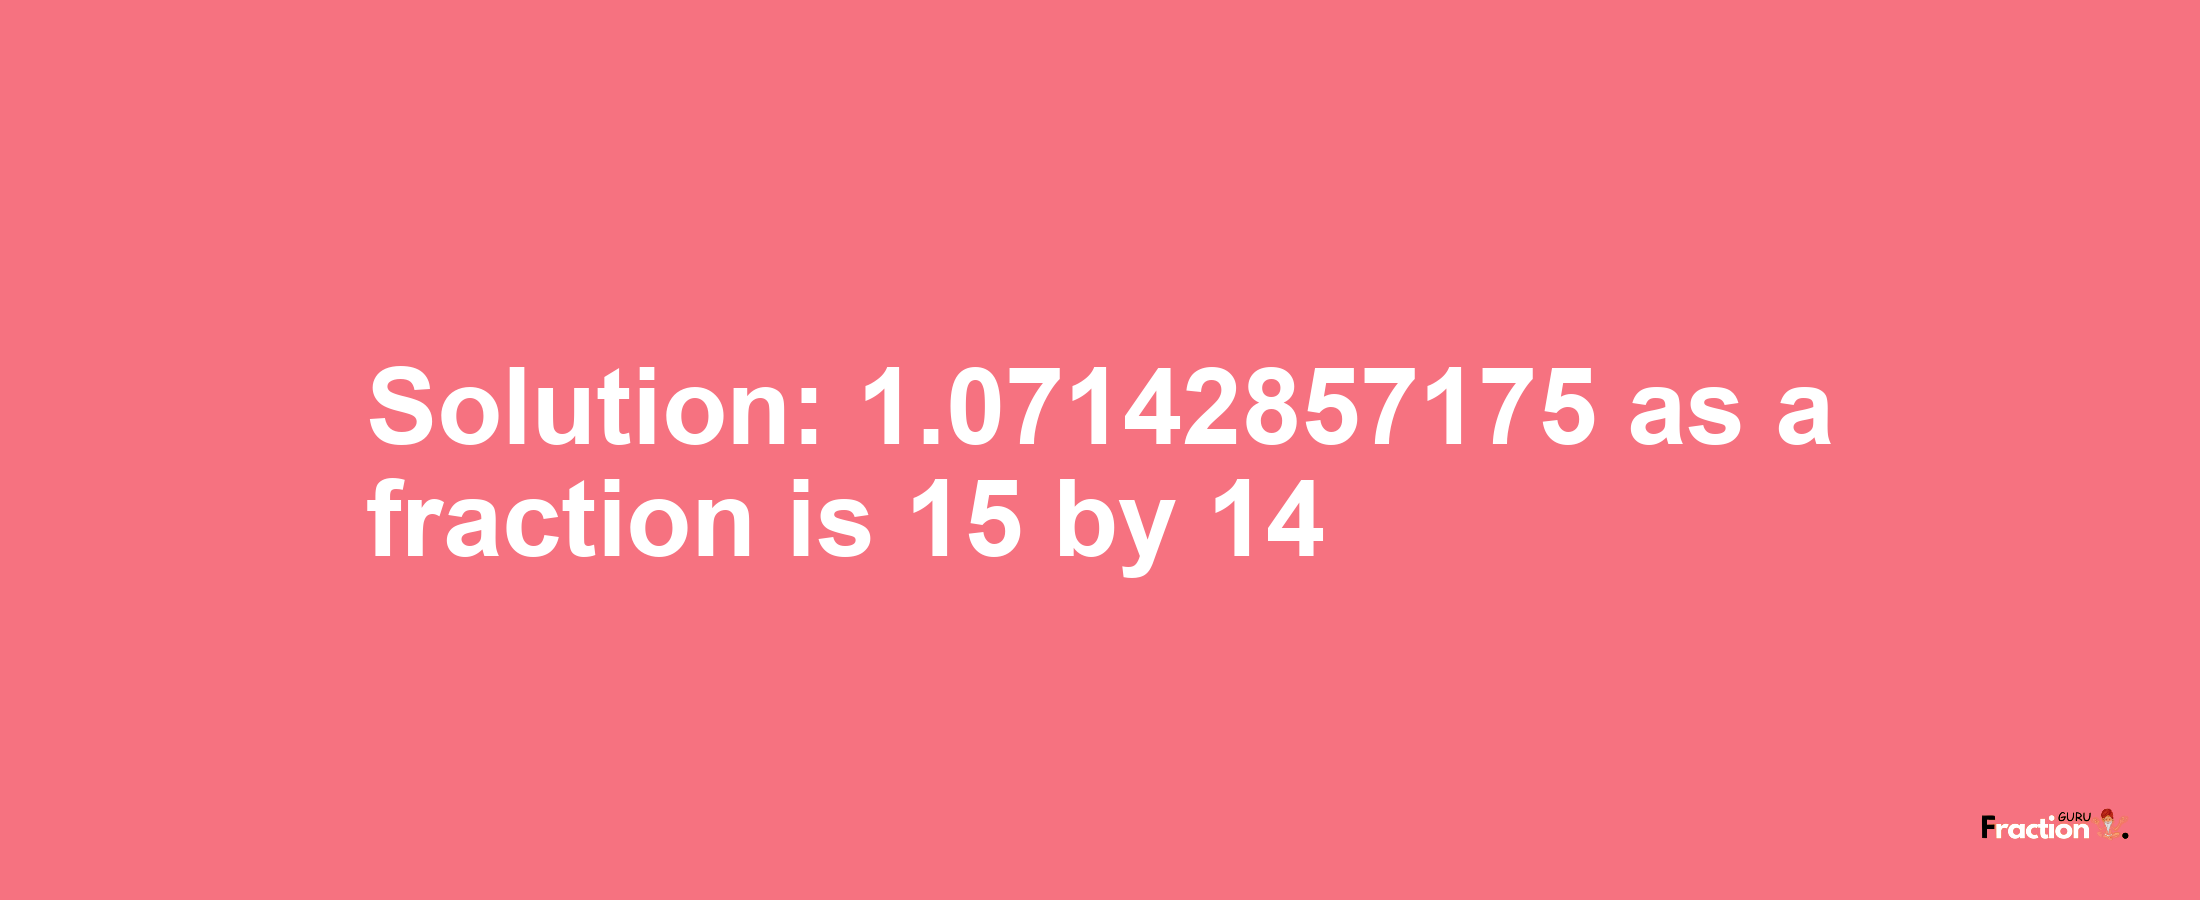 Solution:1.07142857175 as a fraction is 15/14